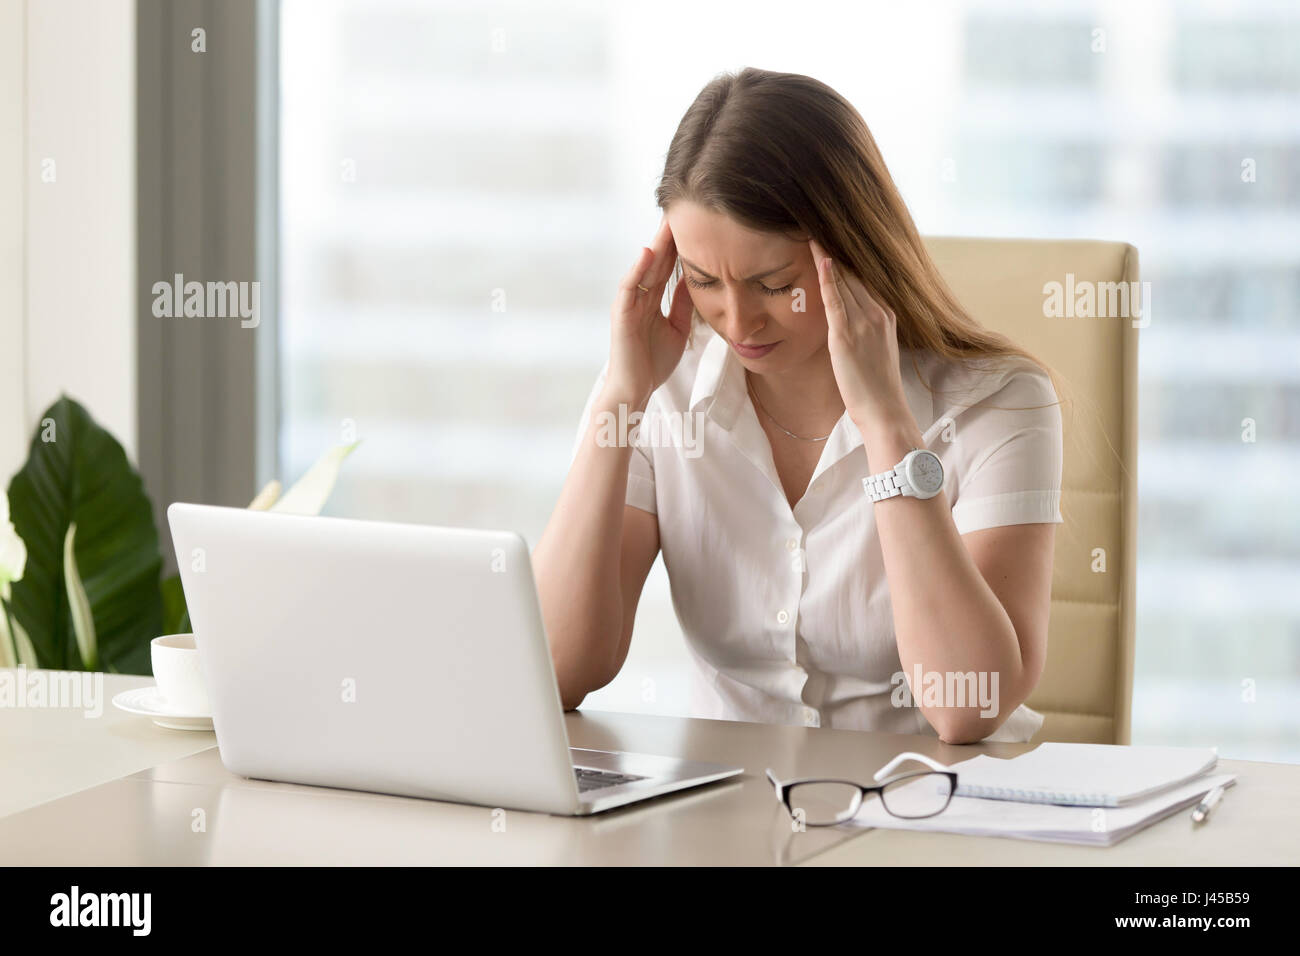 Businesswoman under physical tension at work Stock Photo